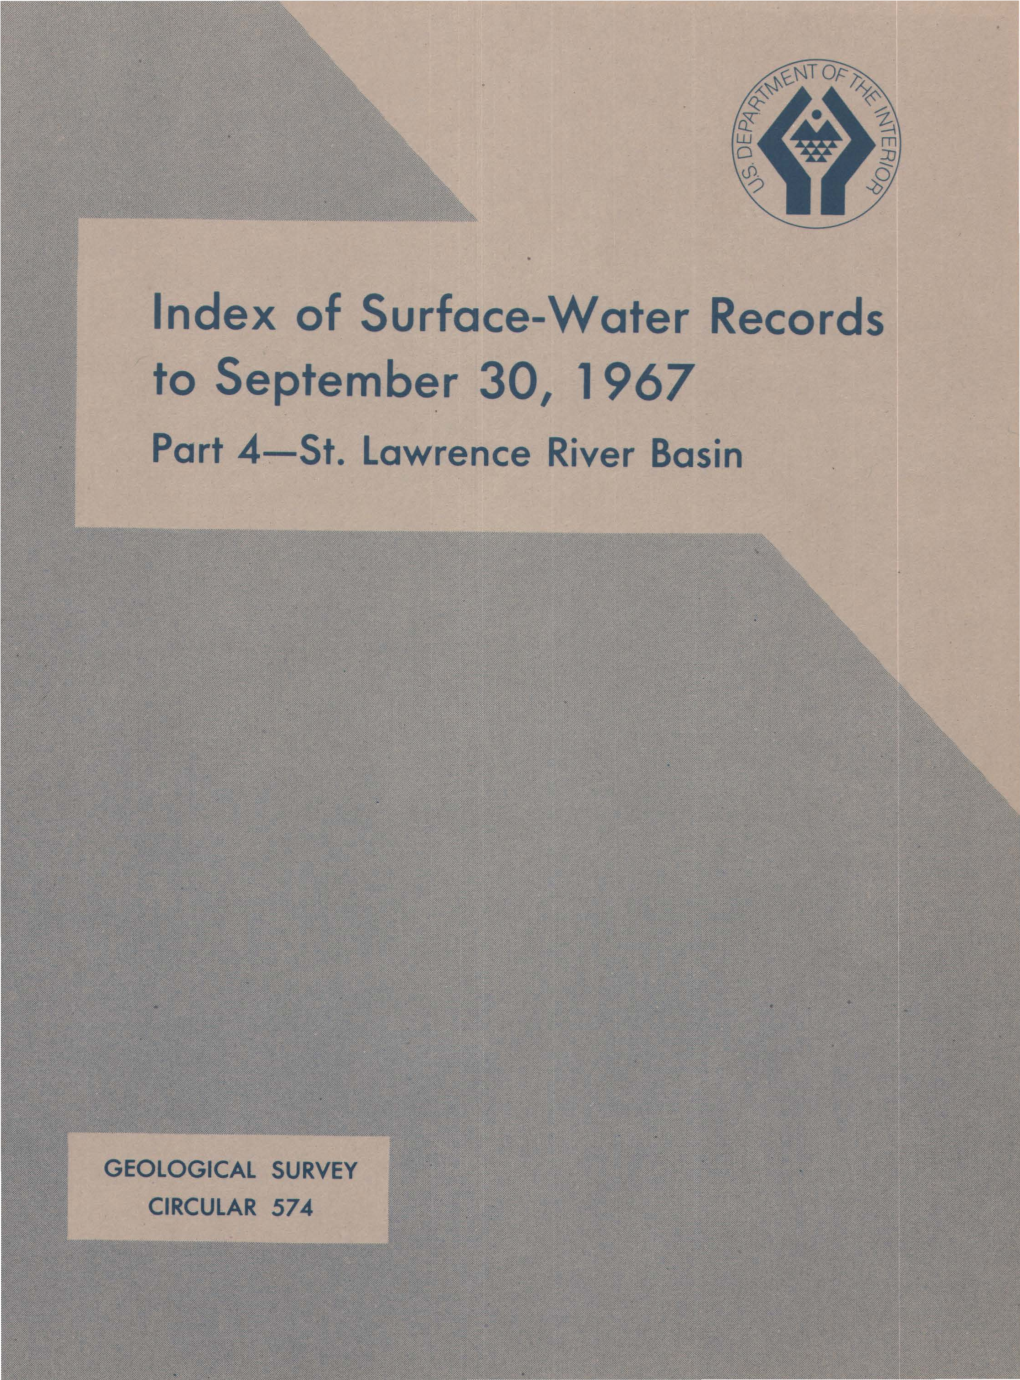 Index of Surface-Water Records to September 30, 1967